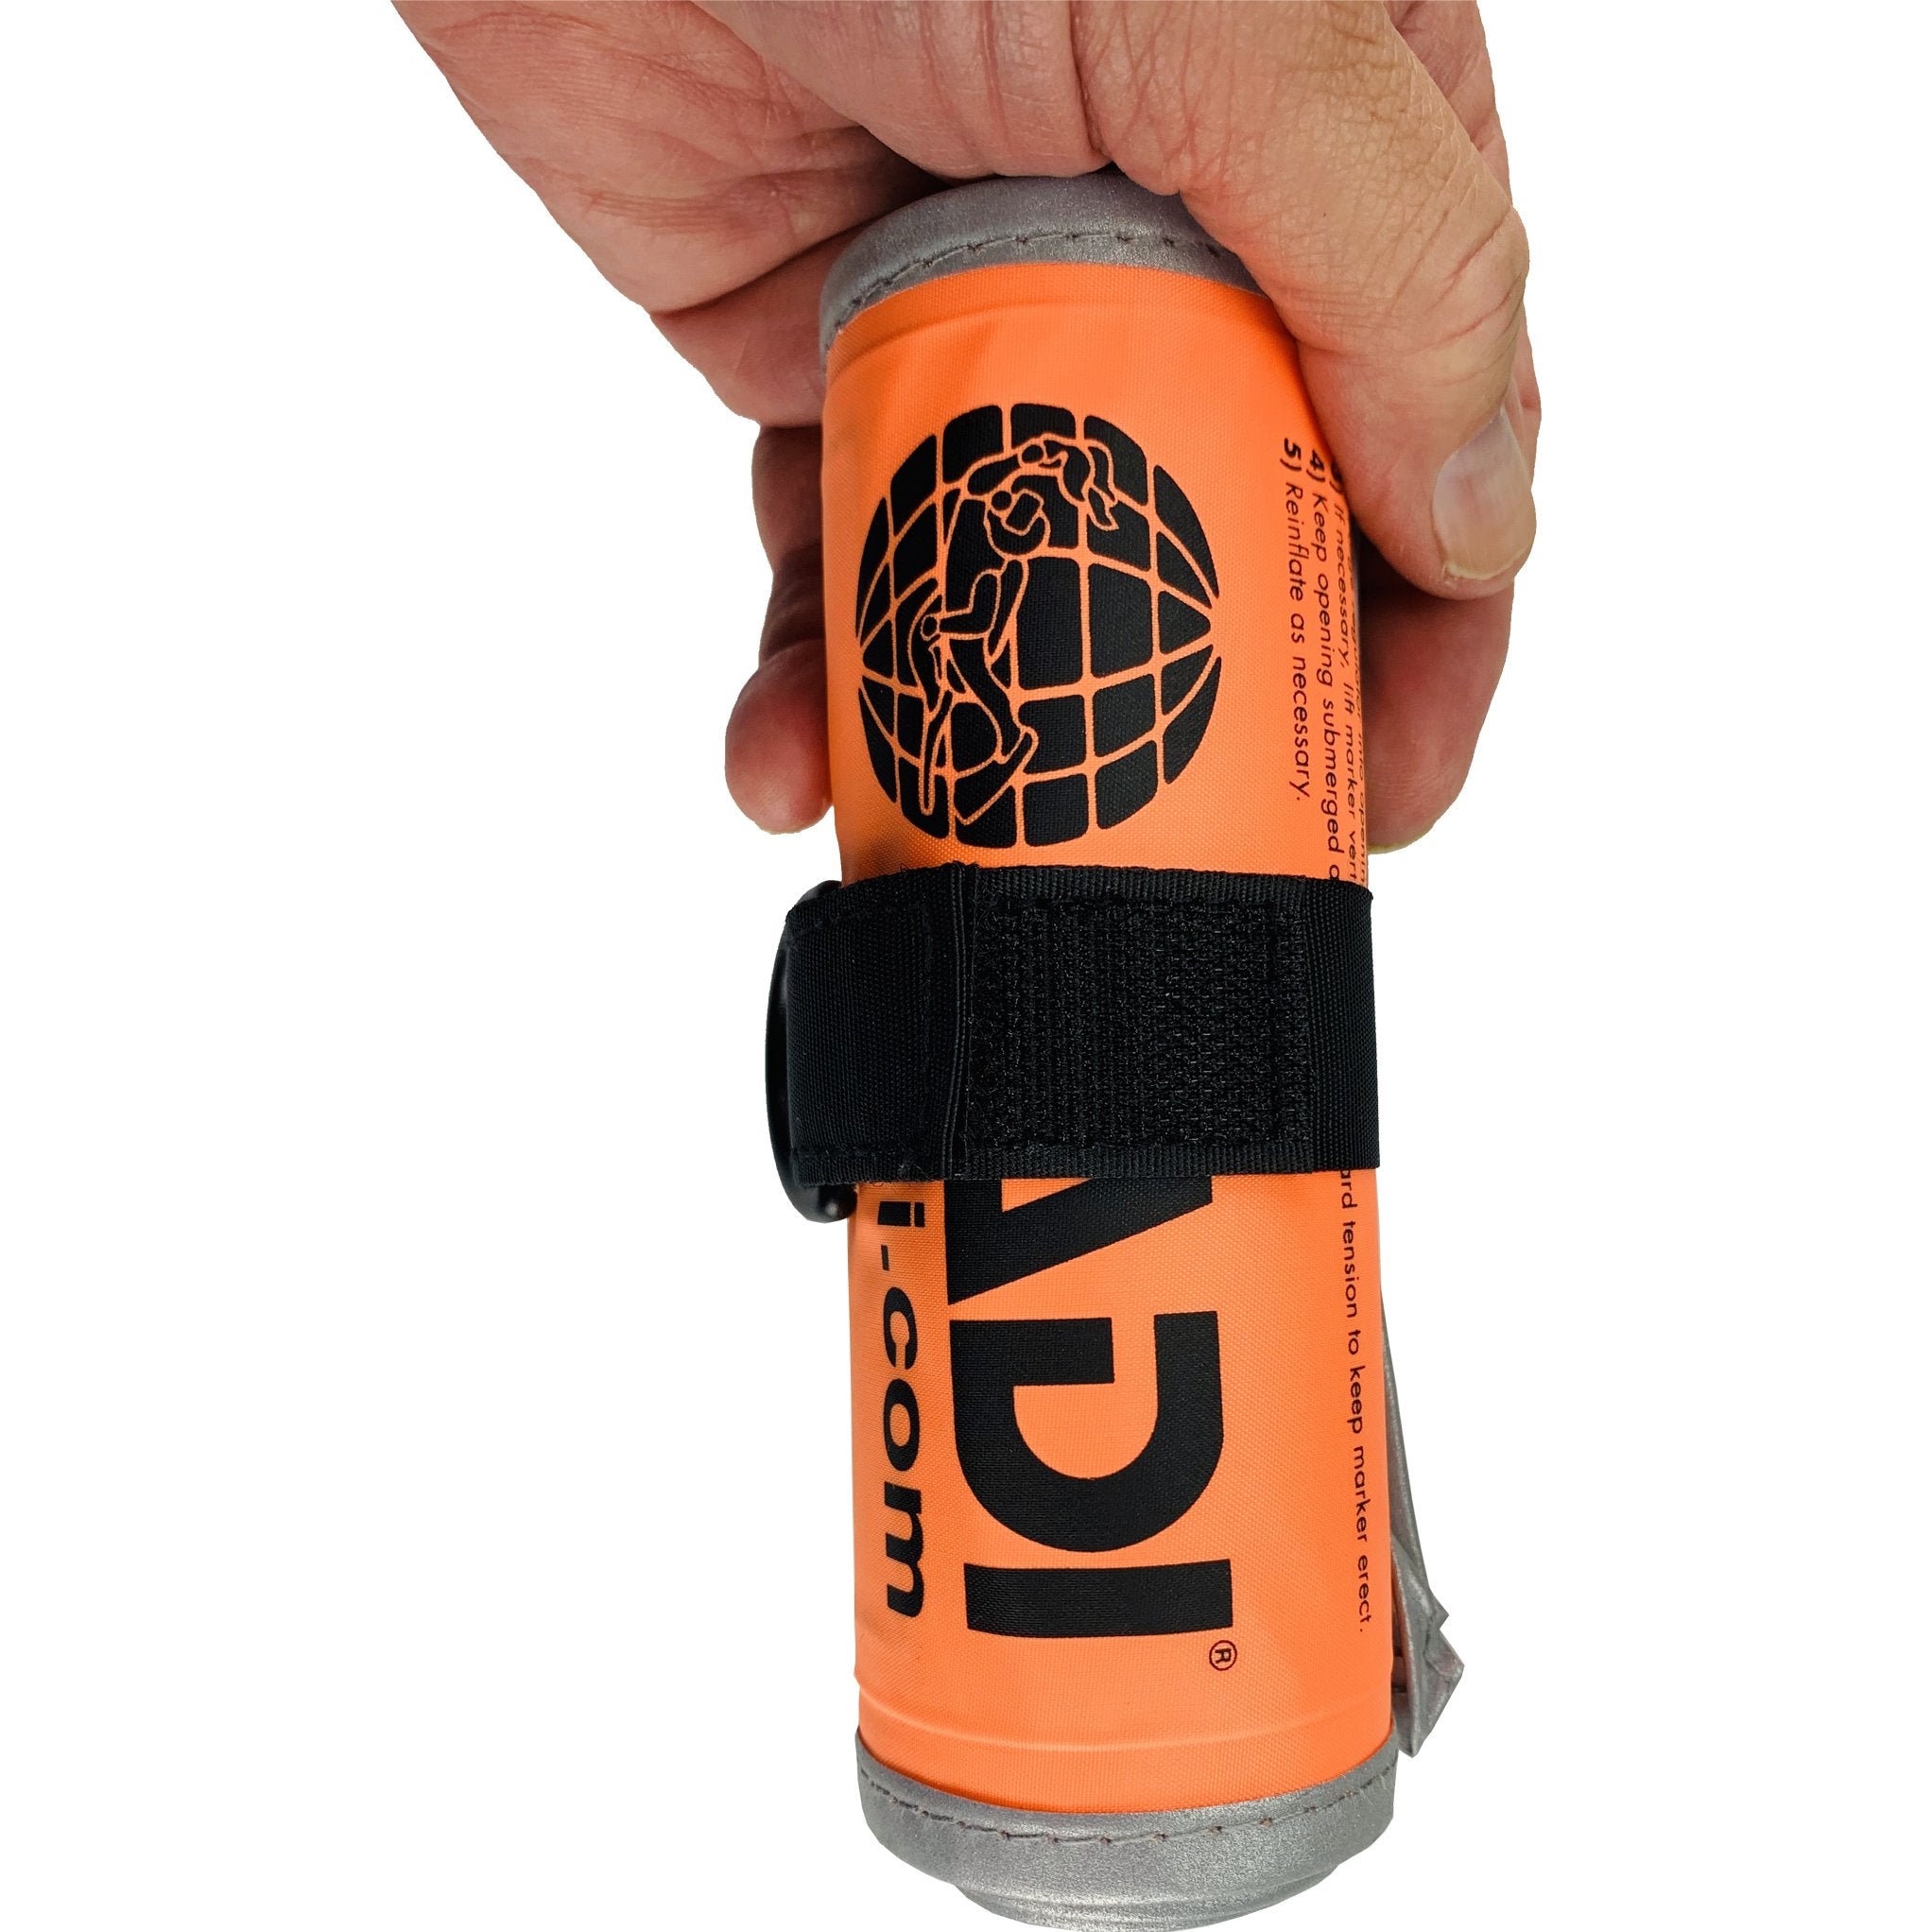 PADI Surface Signal Marker Buoy (SMB) for Divers | Rolled in hand